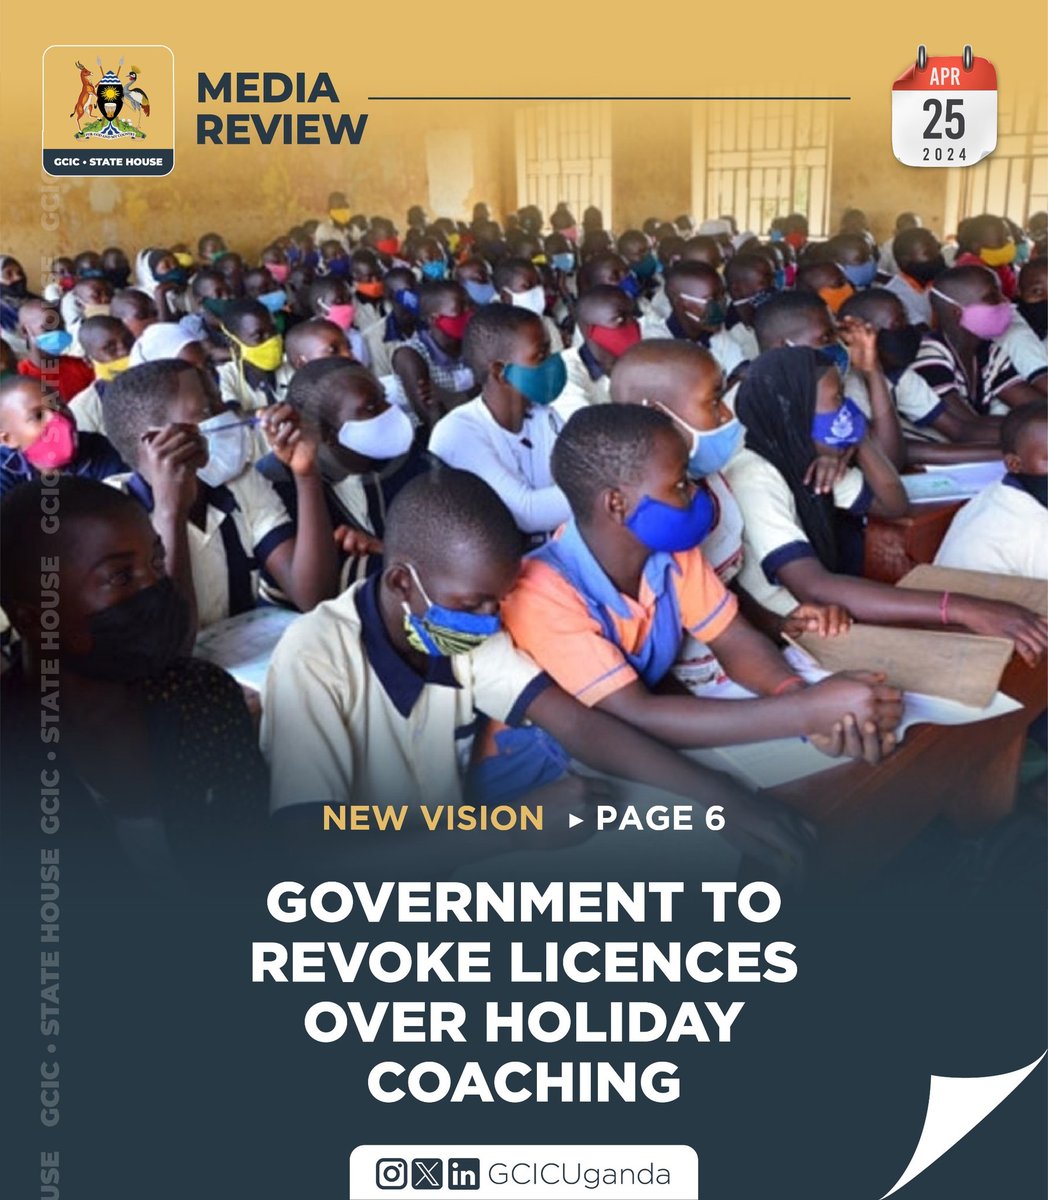 Government has warned schools against operating classes during the holiday period, saying revocation of operational licences is one of the measures now being considered to deal with errant schools. Link:media.gcic.go.ug/gcicmediarevie…